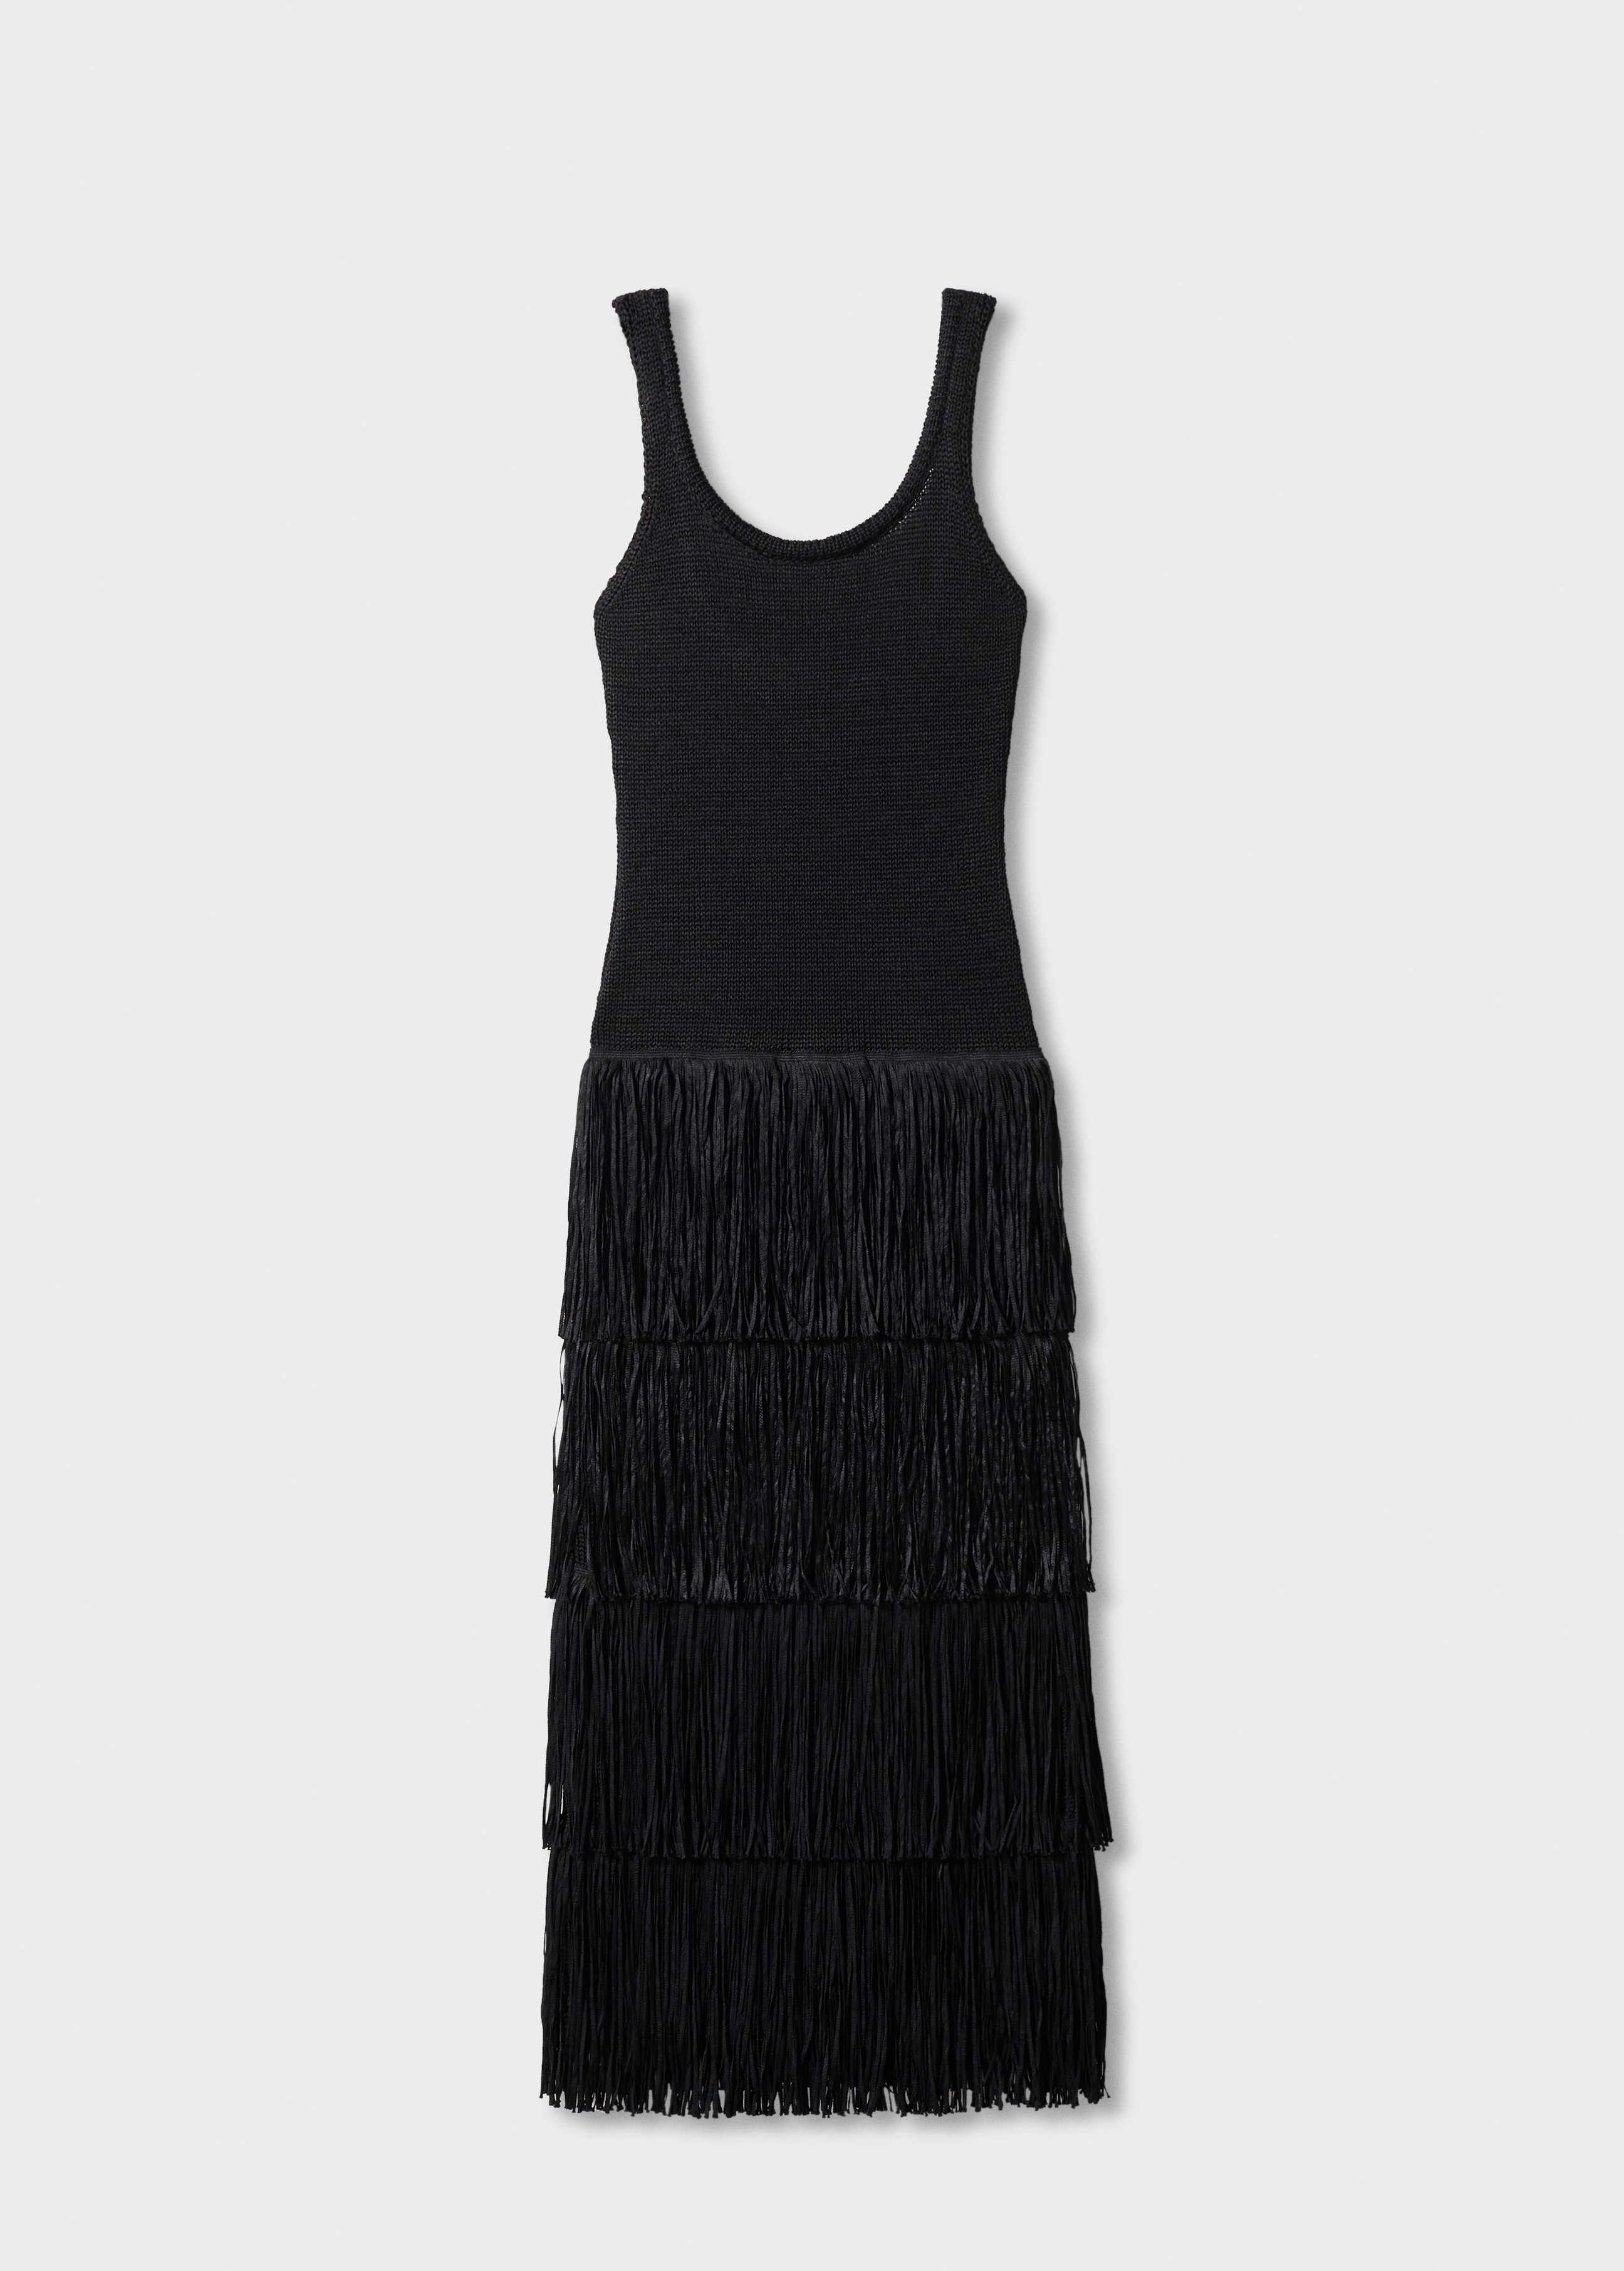 Knitted dress with fringe design - Article without model